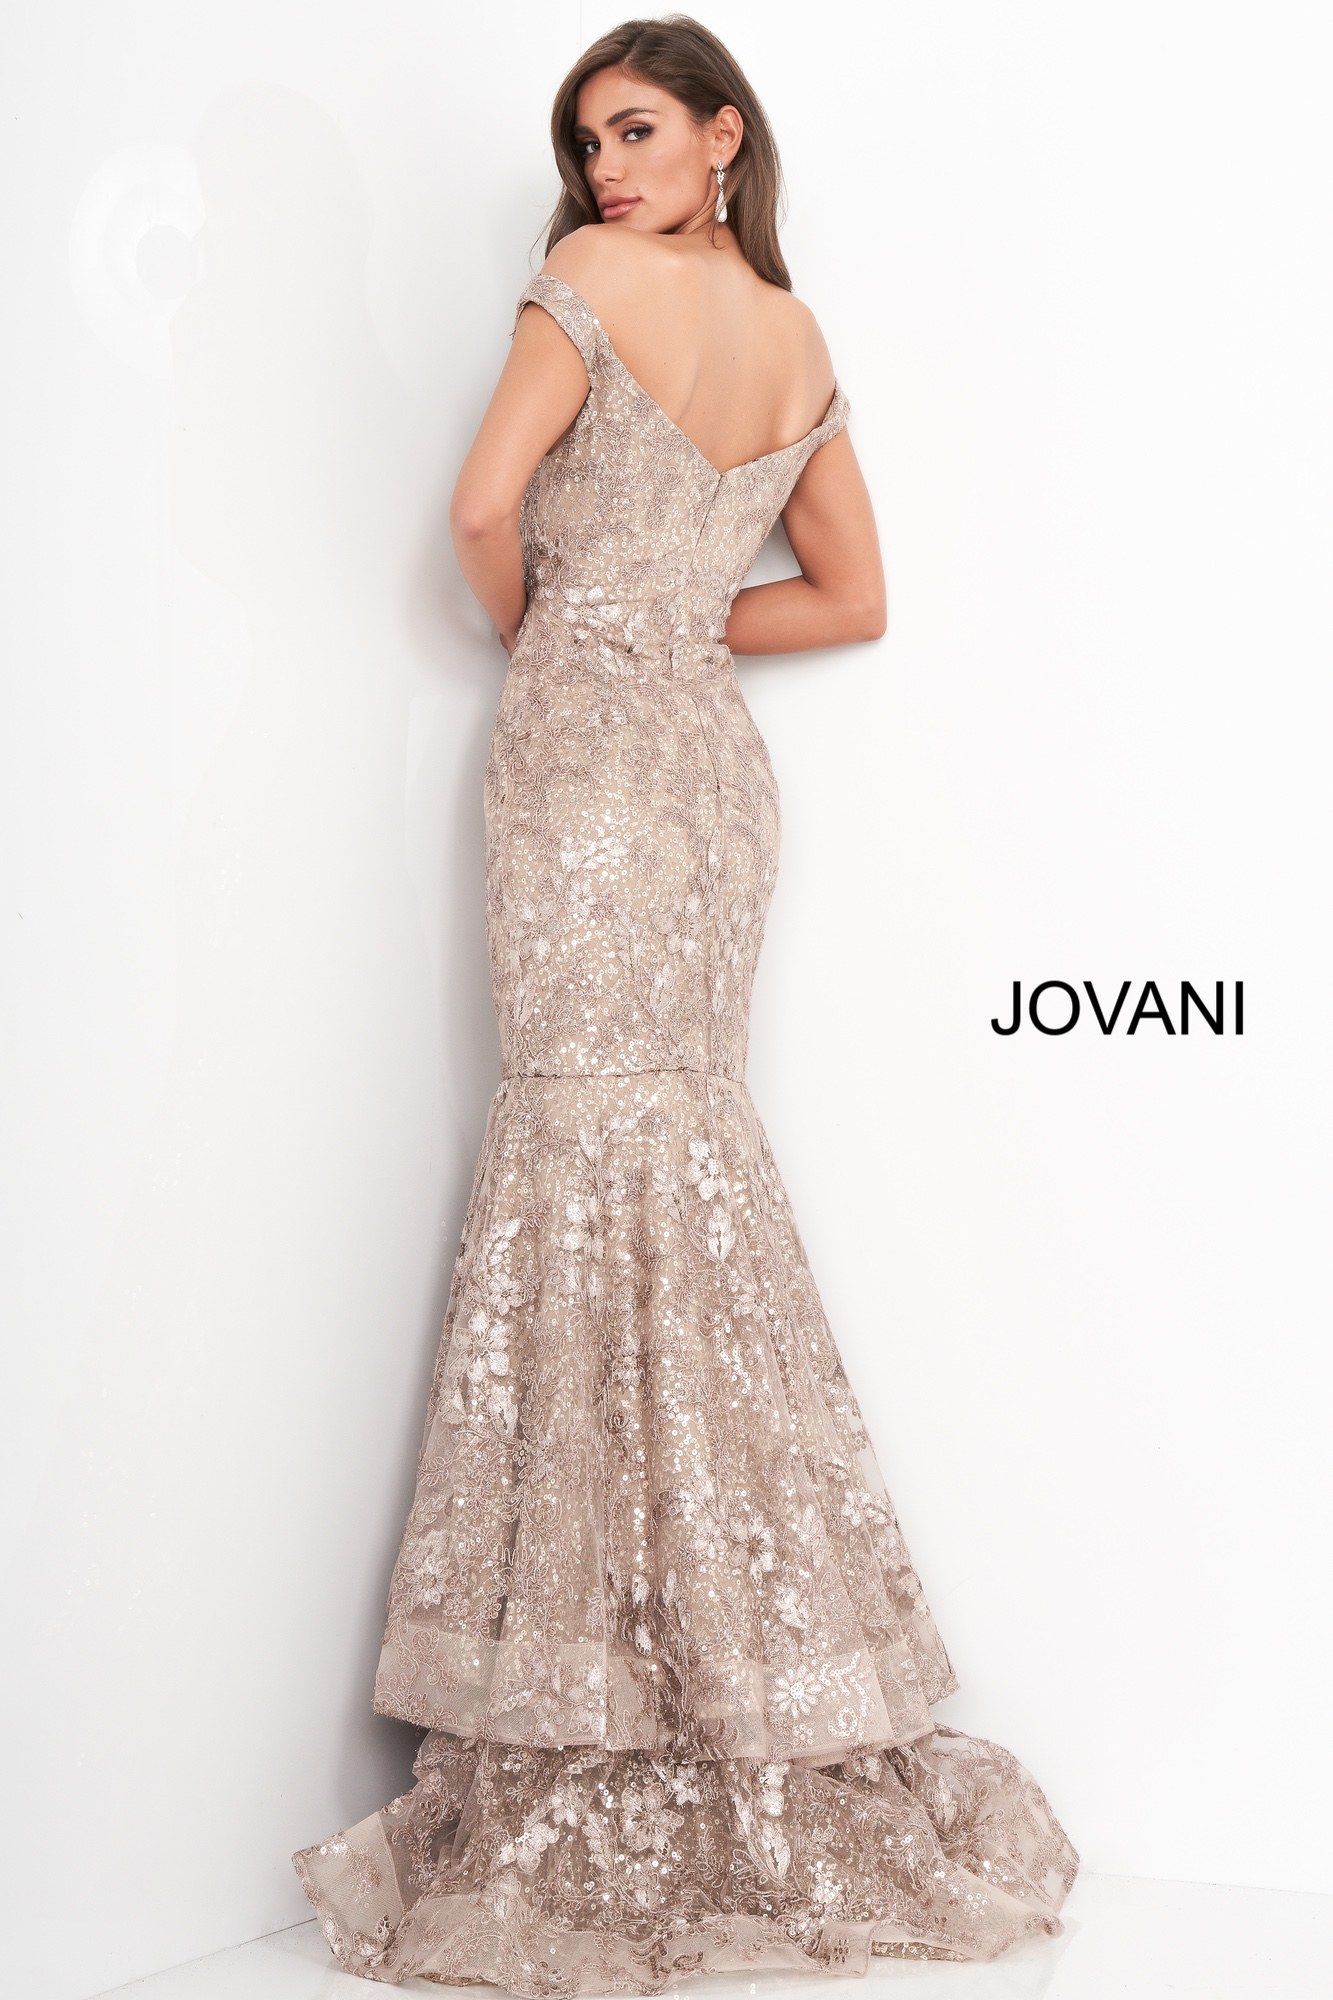 NWT JOVANI  GOLD LACE MARMAID GOWN CELEBRITY/EVENINGS $1128 AUTENTIC LOW PRICE 